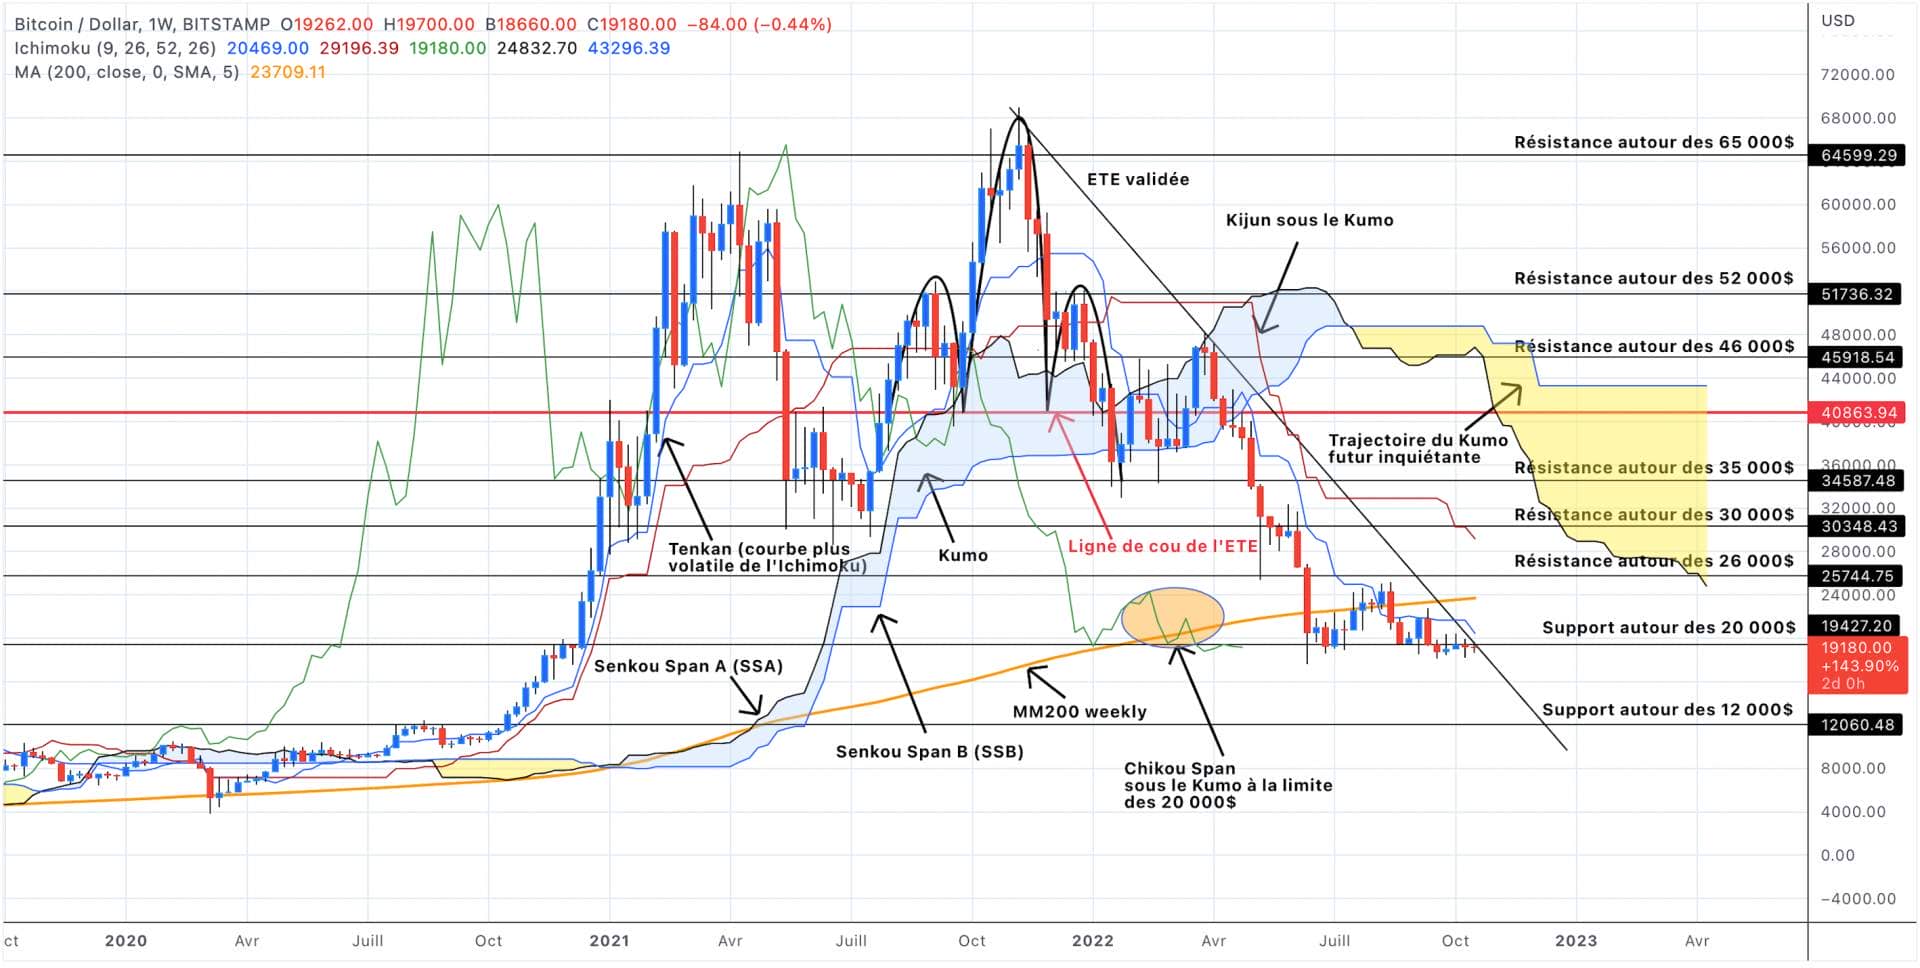 Bitcoin Price Analysis In Weekly Units - October 22, 2022